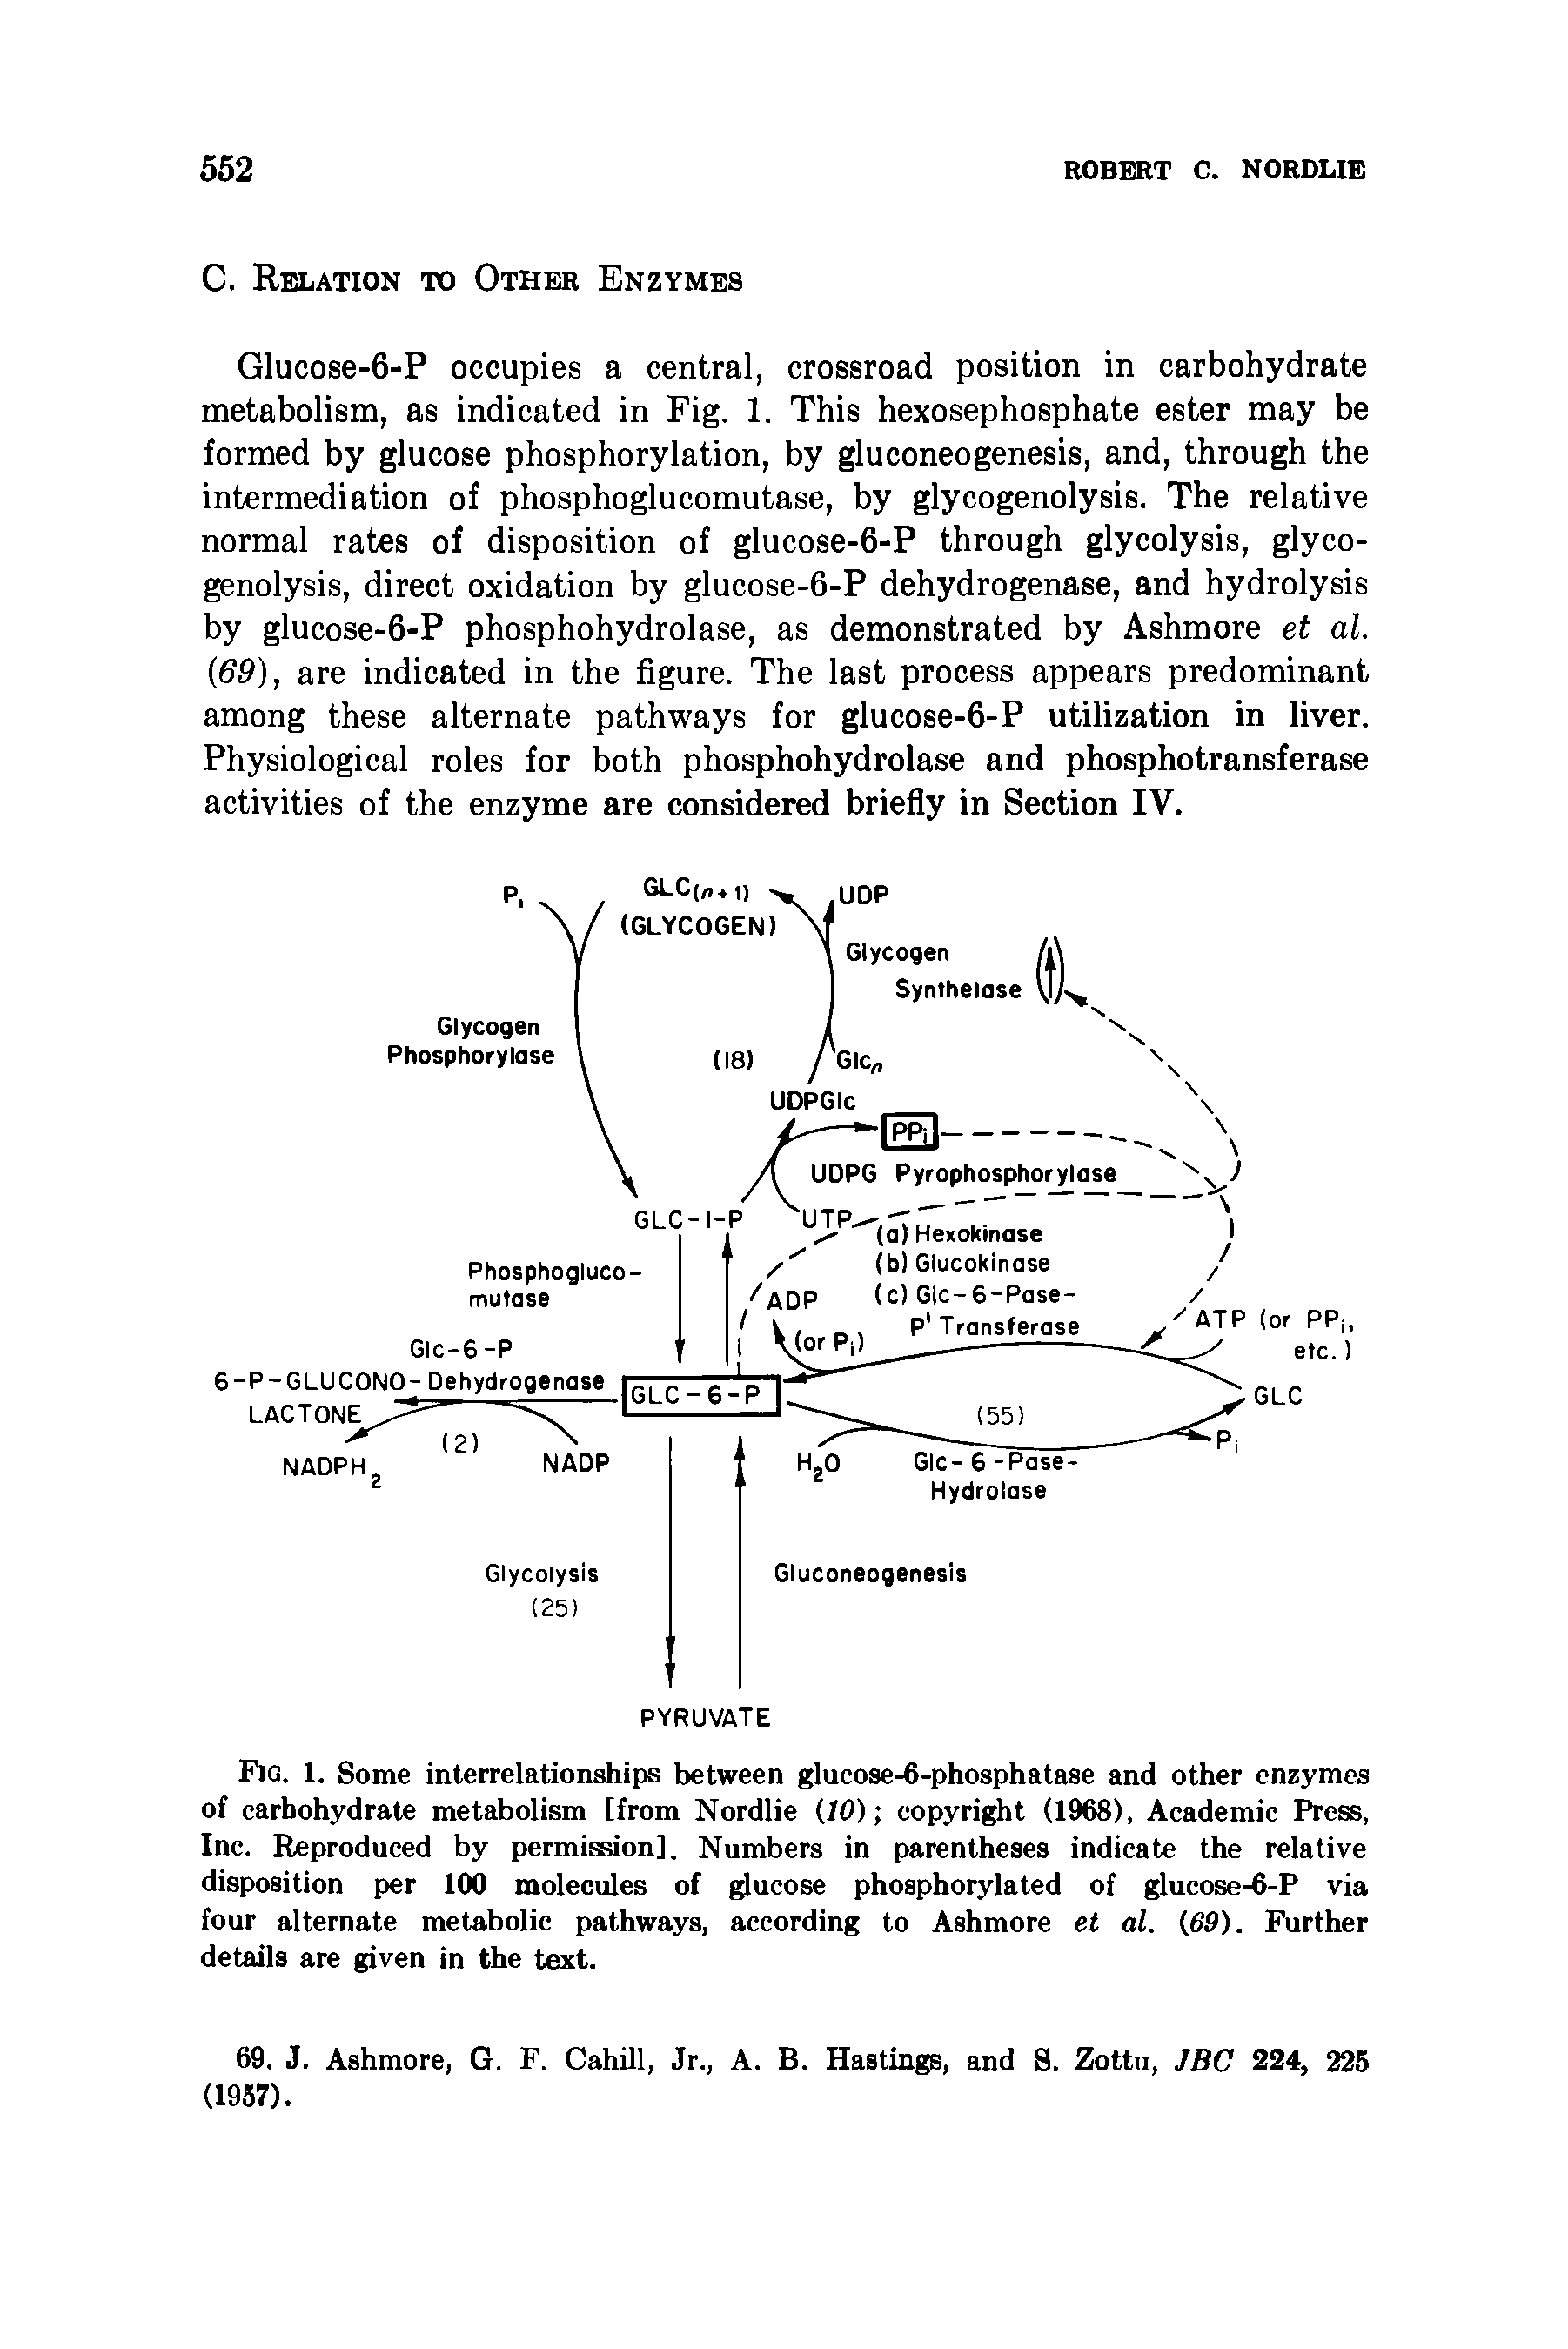 Fig. 1. Some interrelationships between glucose-6-phosphatase and other enzymes of carbohydrate metabolism [from Nordlie (10) copyright (1968), Academic Press, Inc. Reproduced by permission]. Numbers in parentheses indicate the relative disposition per 100 molecules of glucose phosphorylated of glucose-6-P via four alternate metabolic pathways, according to Ashmore et al. (69). Further details are given in the text.